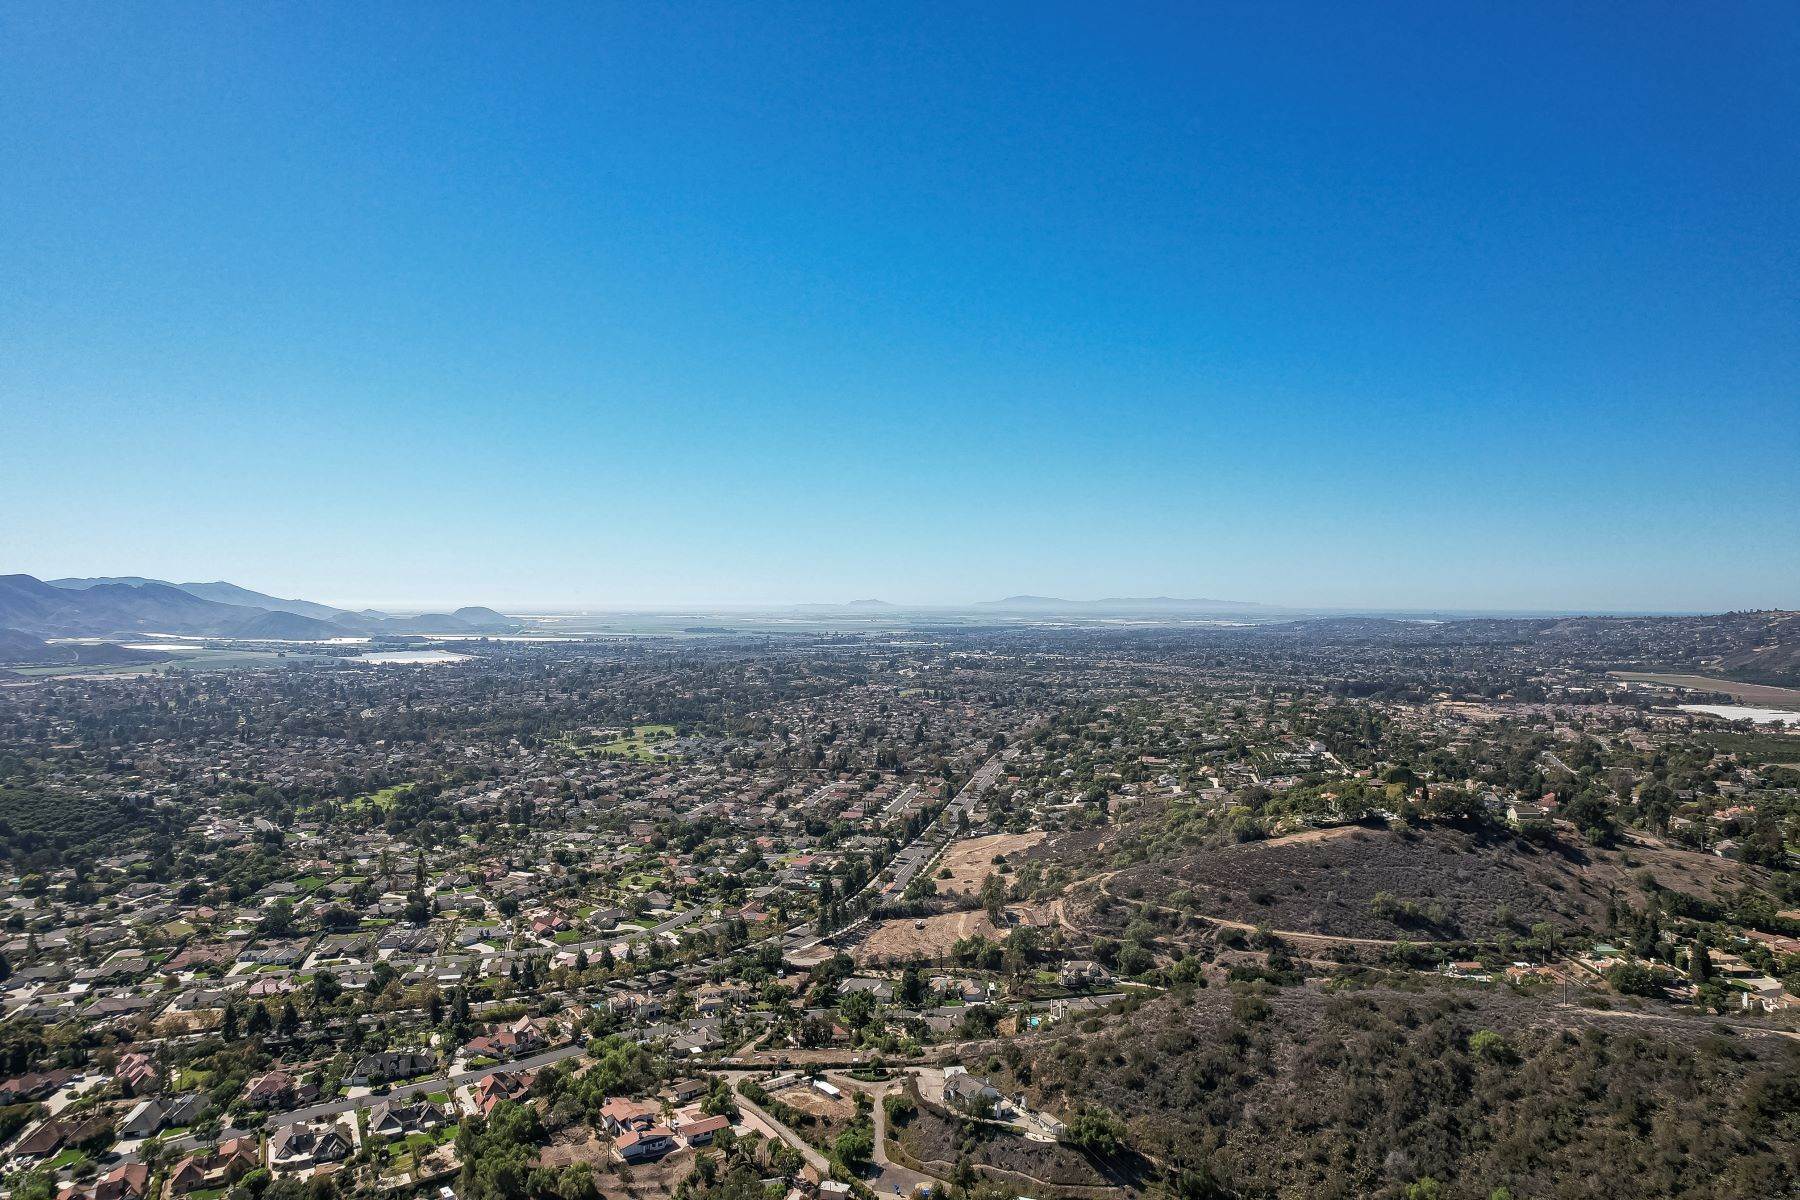 Land for Sale at 52.06 Residential Acres In Camarillo 52.06 Residential Acres In Camarillo, Camarillo, California 93012 United States